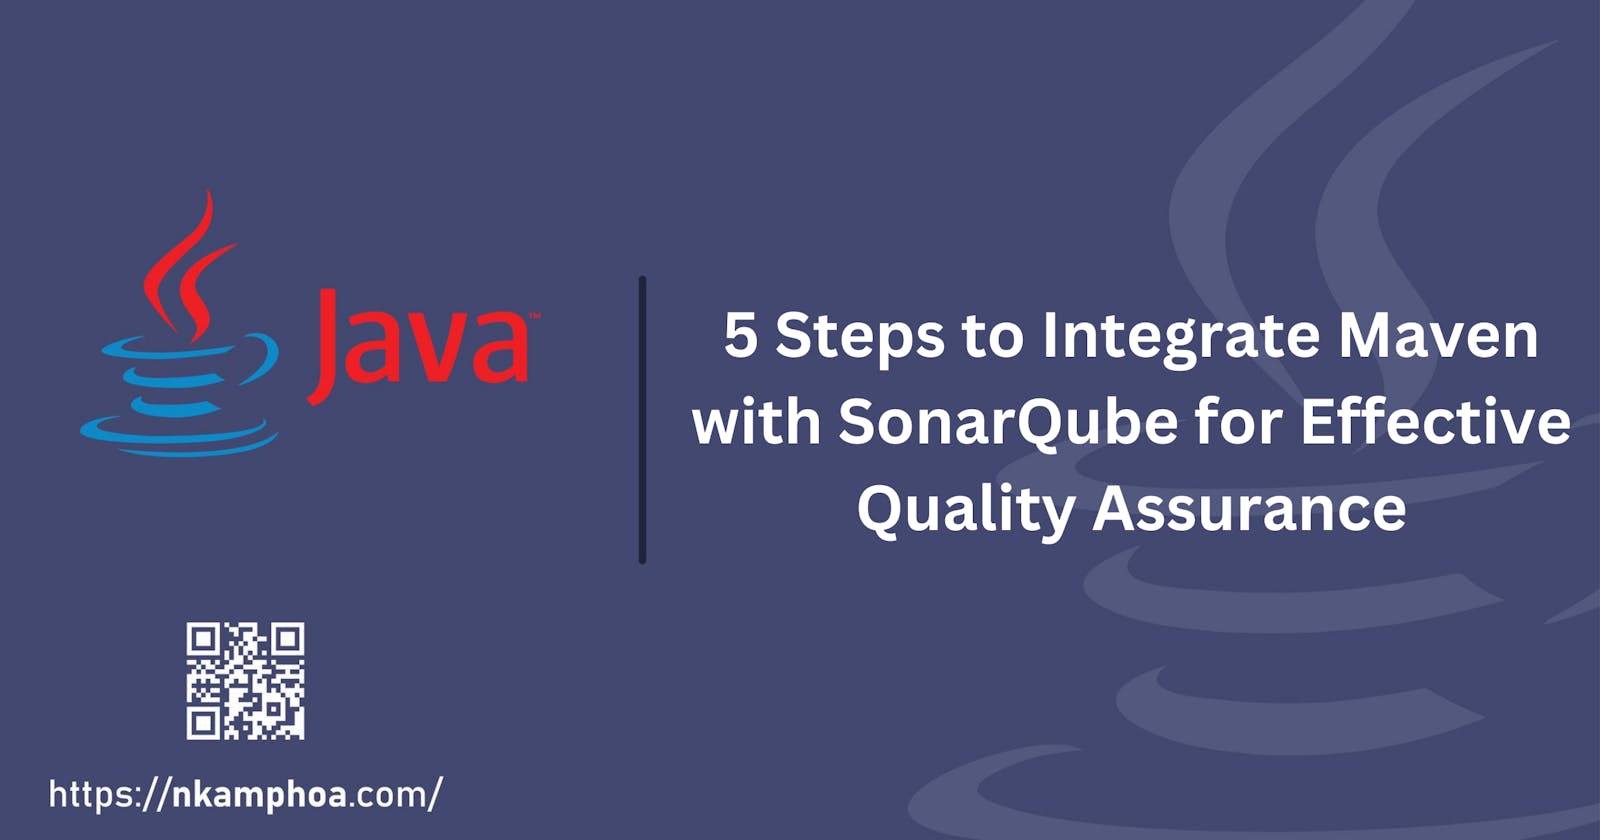 5 Steps to Integrate Maven with SonarQube for Effective Quality Assurance